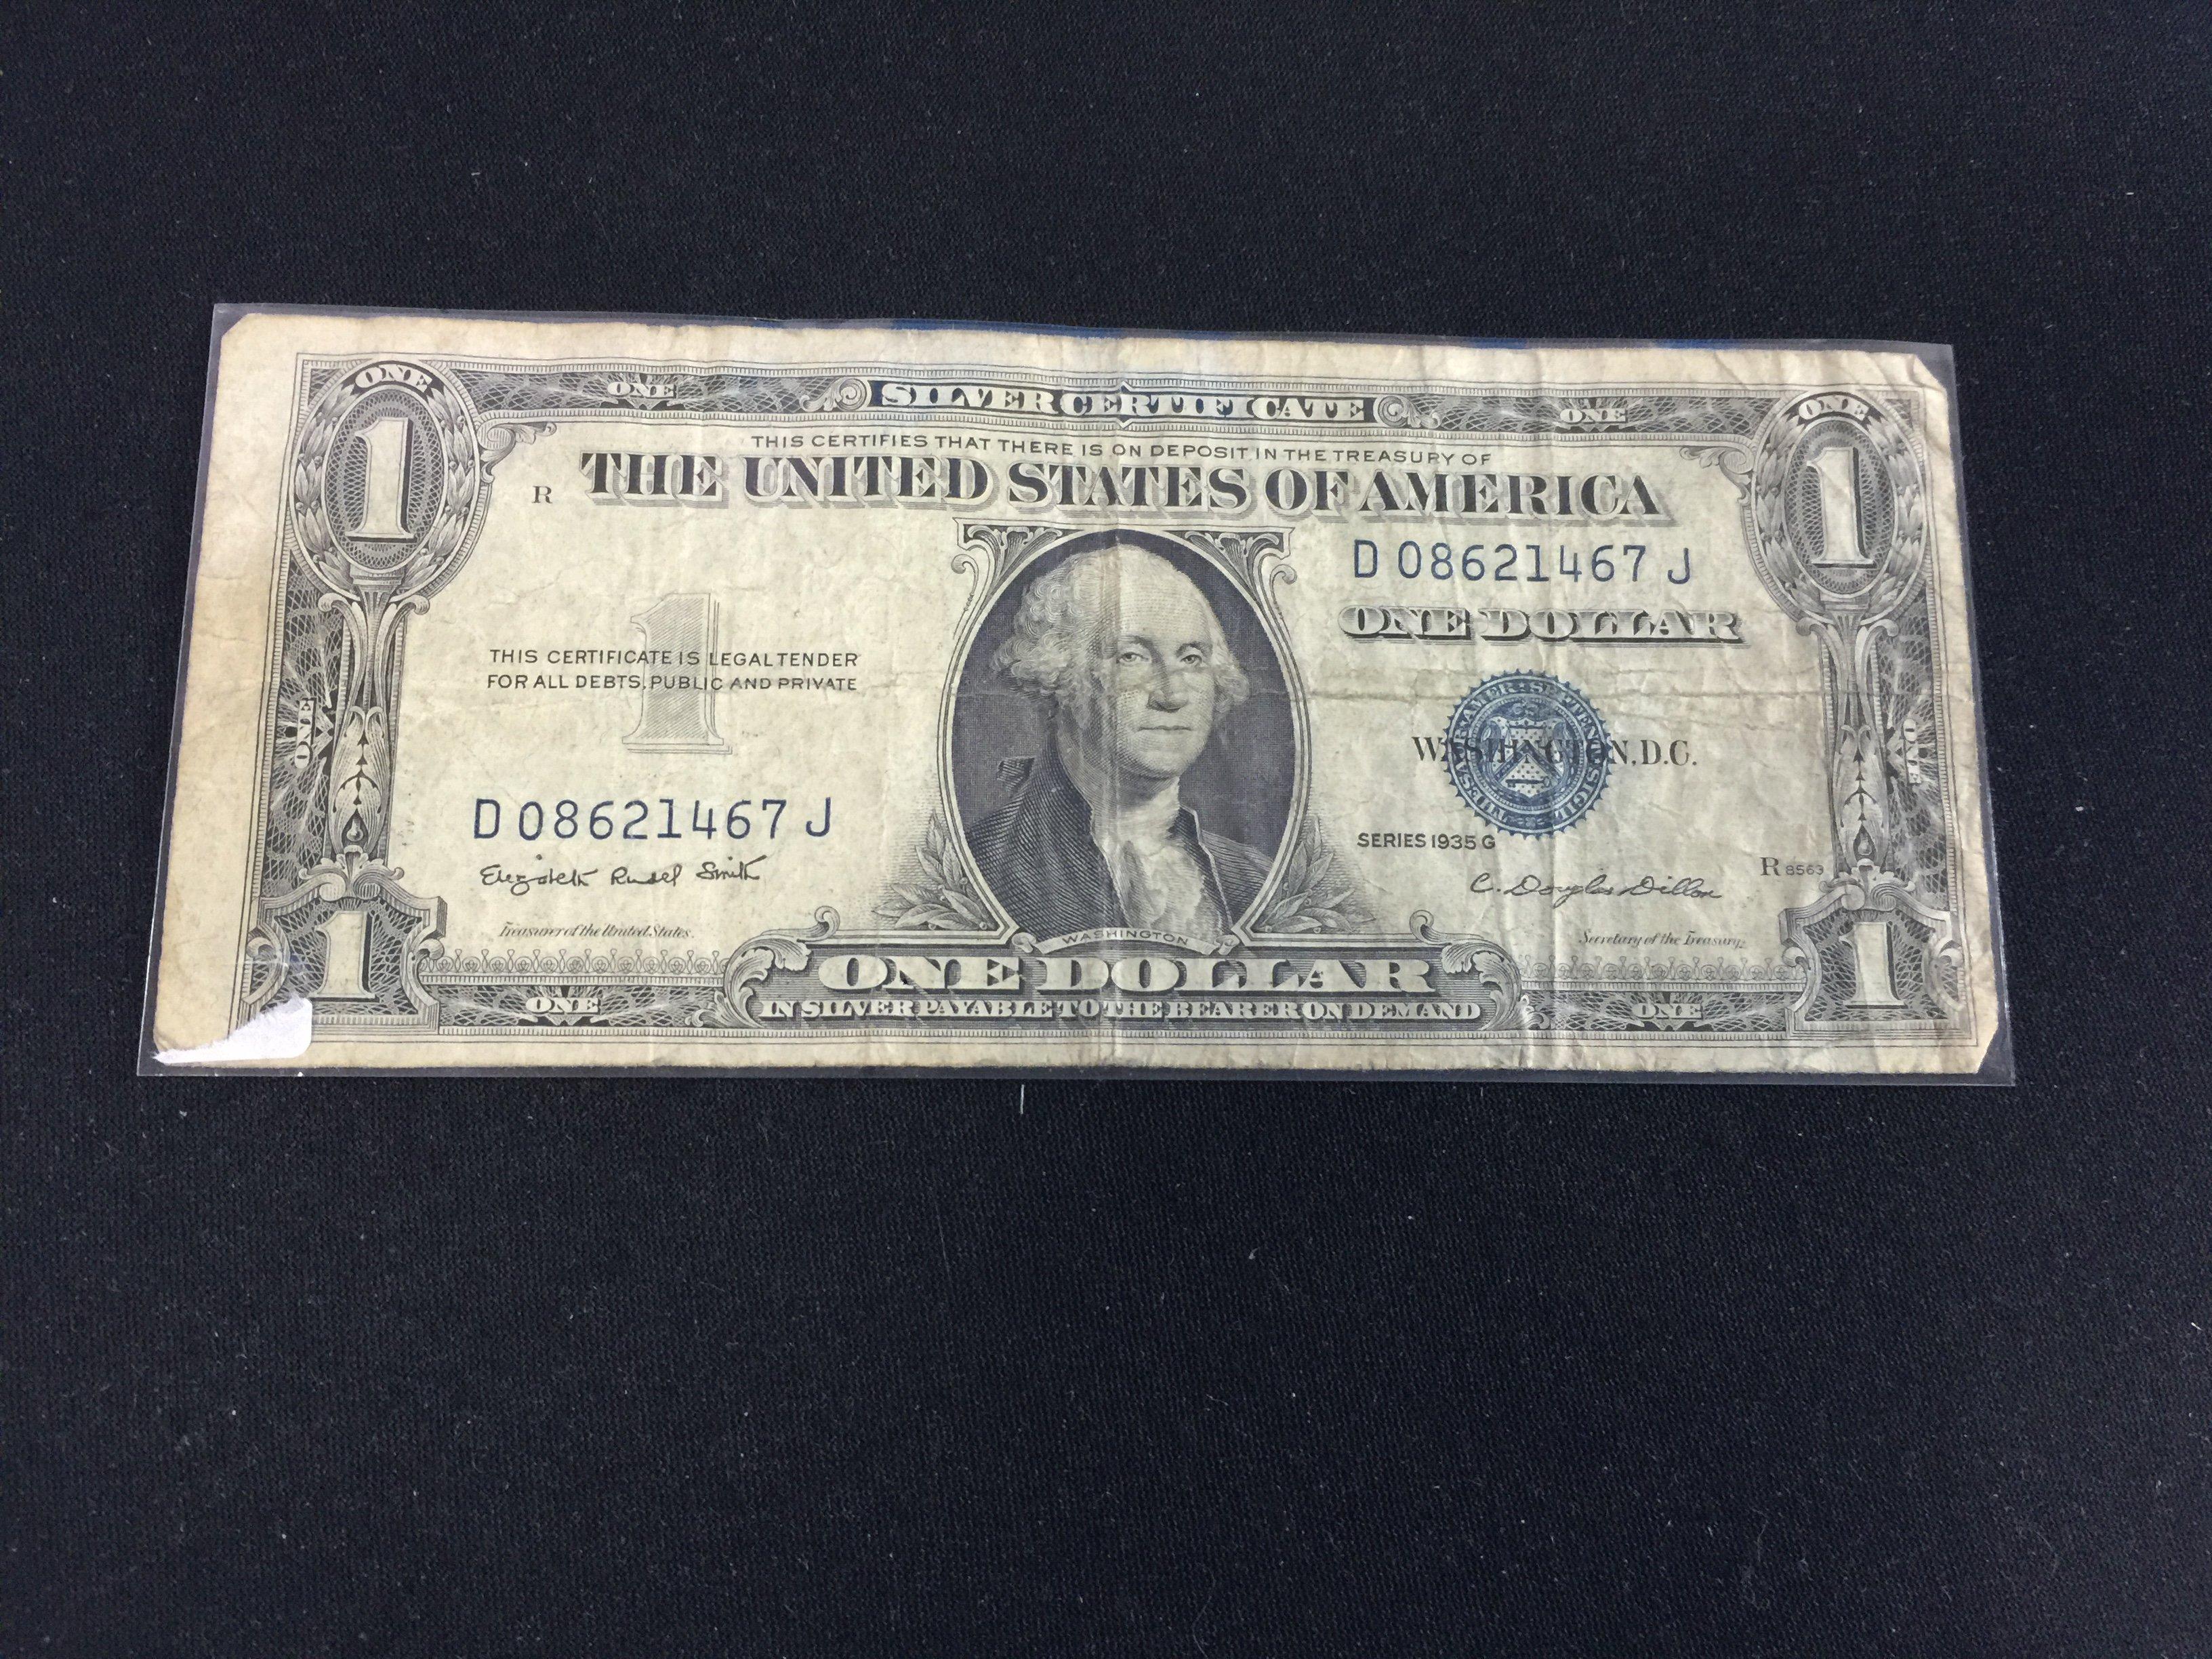 1935-G United States $1 Silver Certificate Currency Bill Note